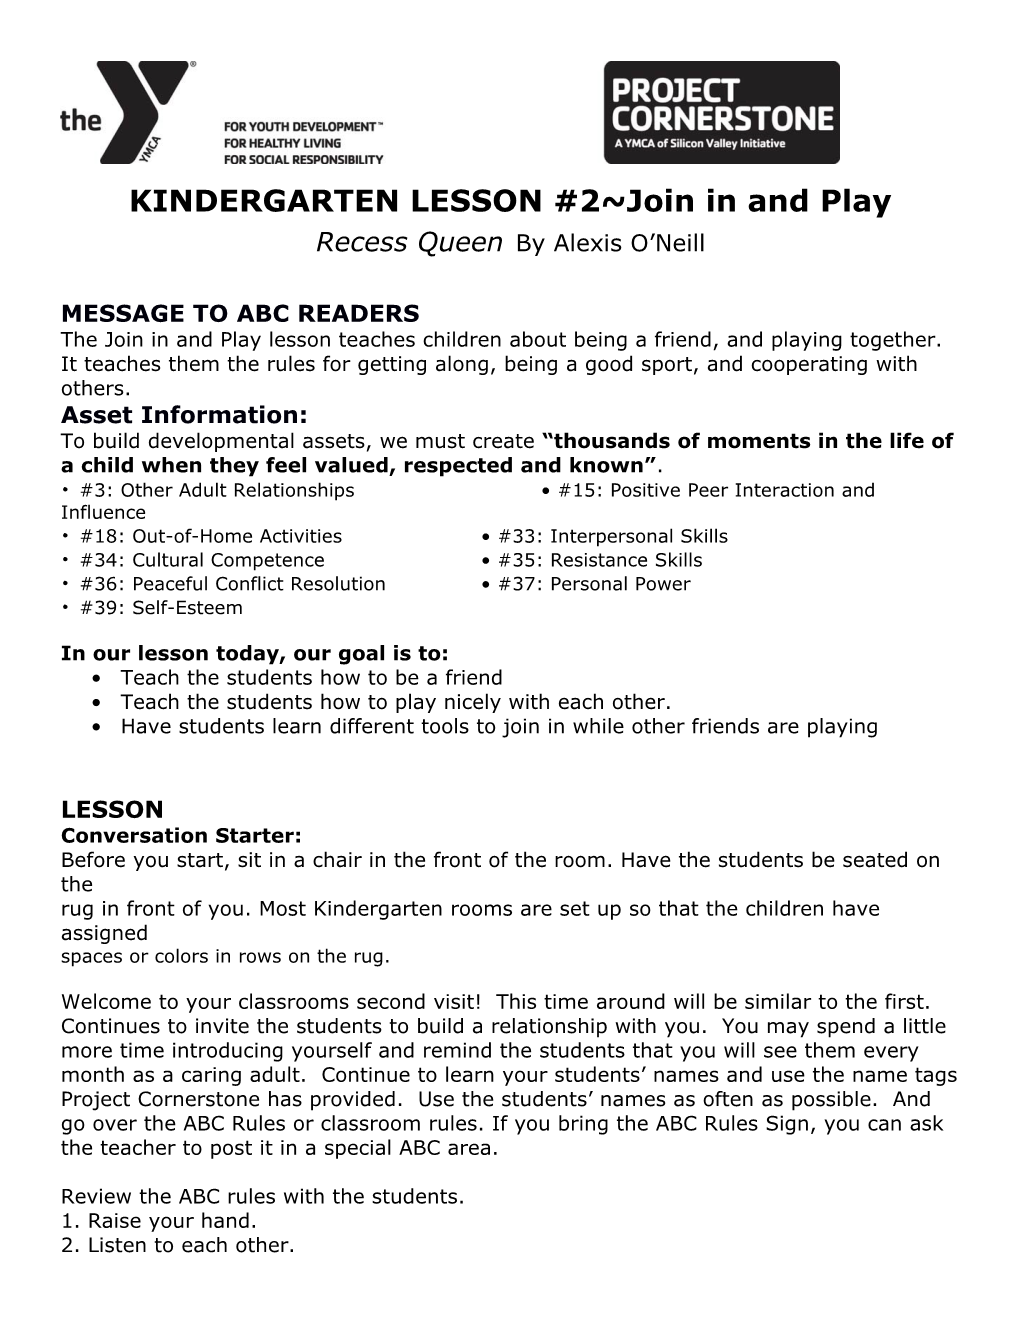 KINDERGARTEN LESSON #2 Join in and Play